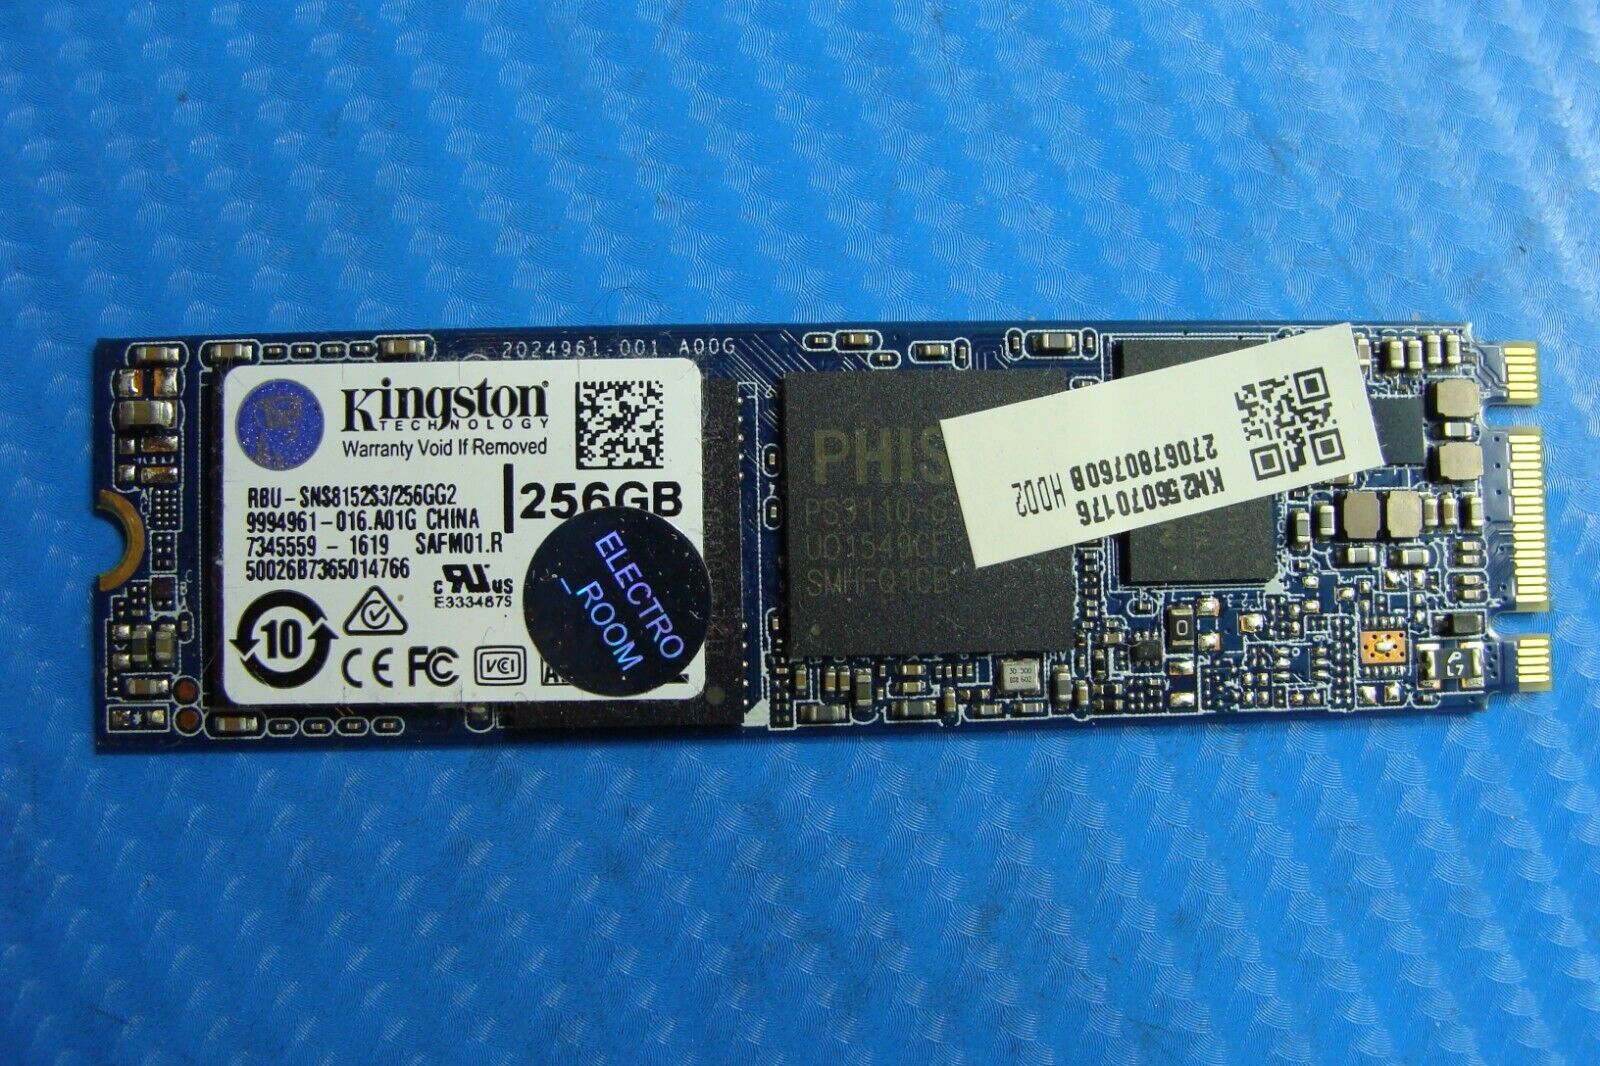 Acer E5-575G-53VG Kingston 256Gb Sata M.2 Ssd Solid State Drive sns8152s3/256gg2 